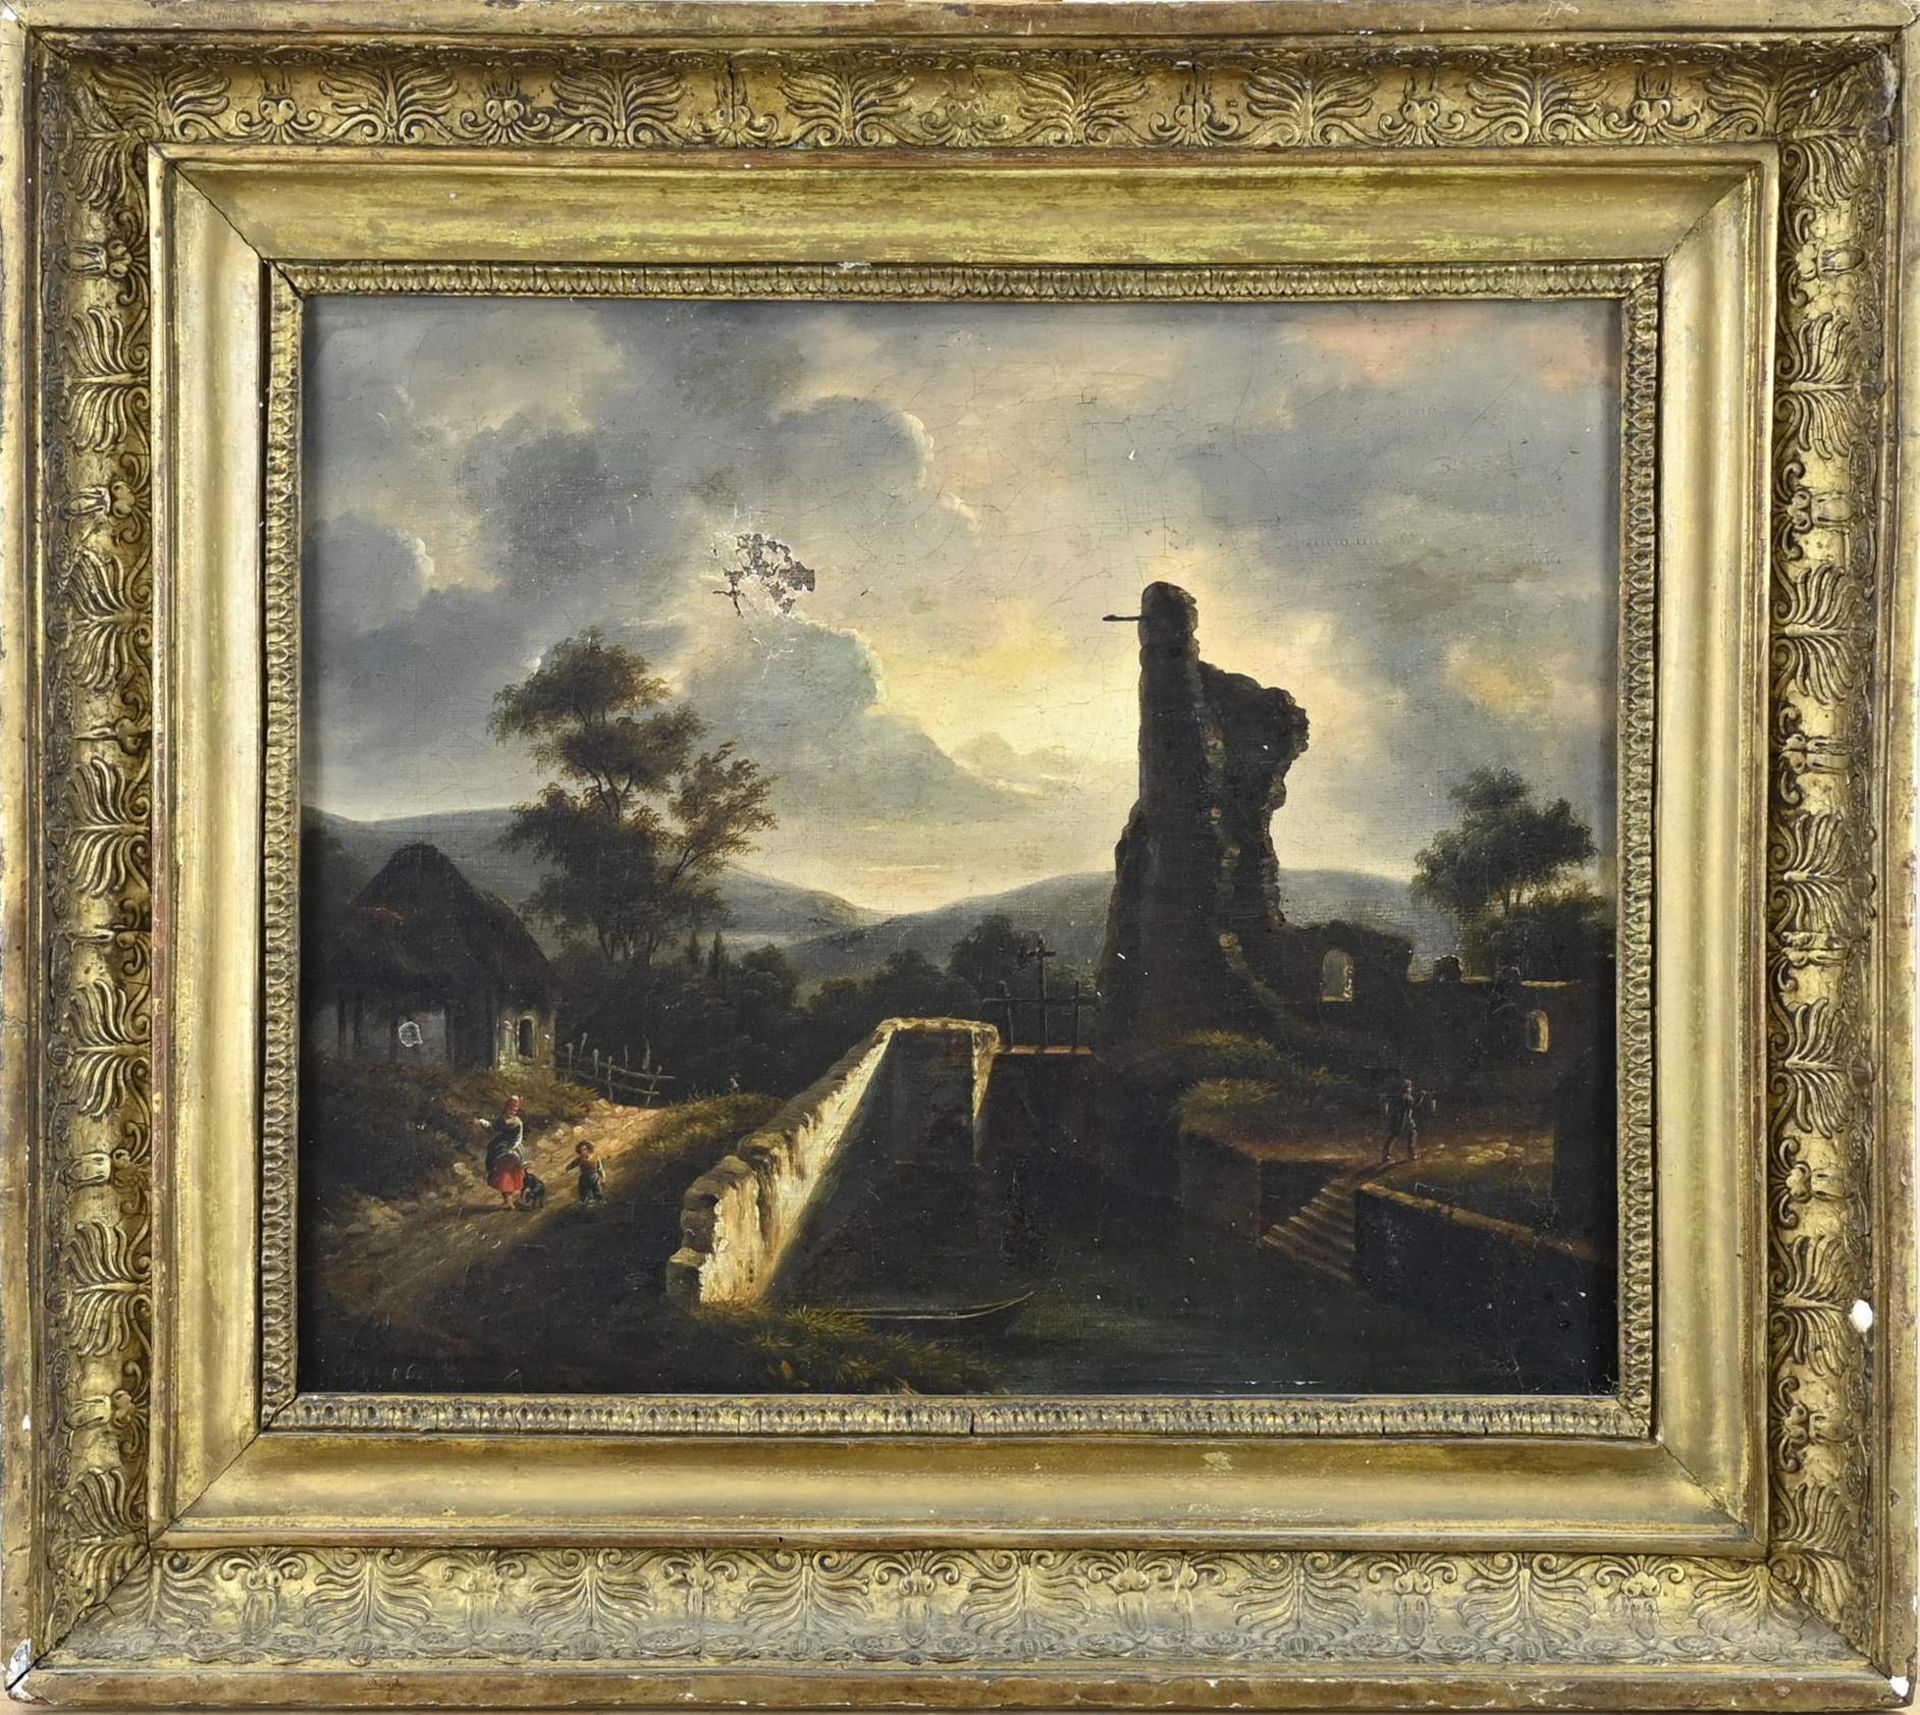 Unclear, Landscape with ruin at night